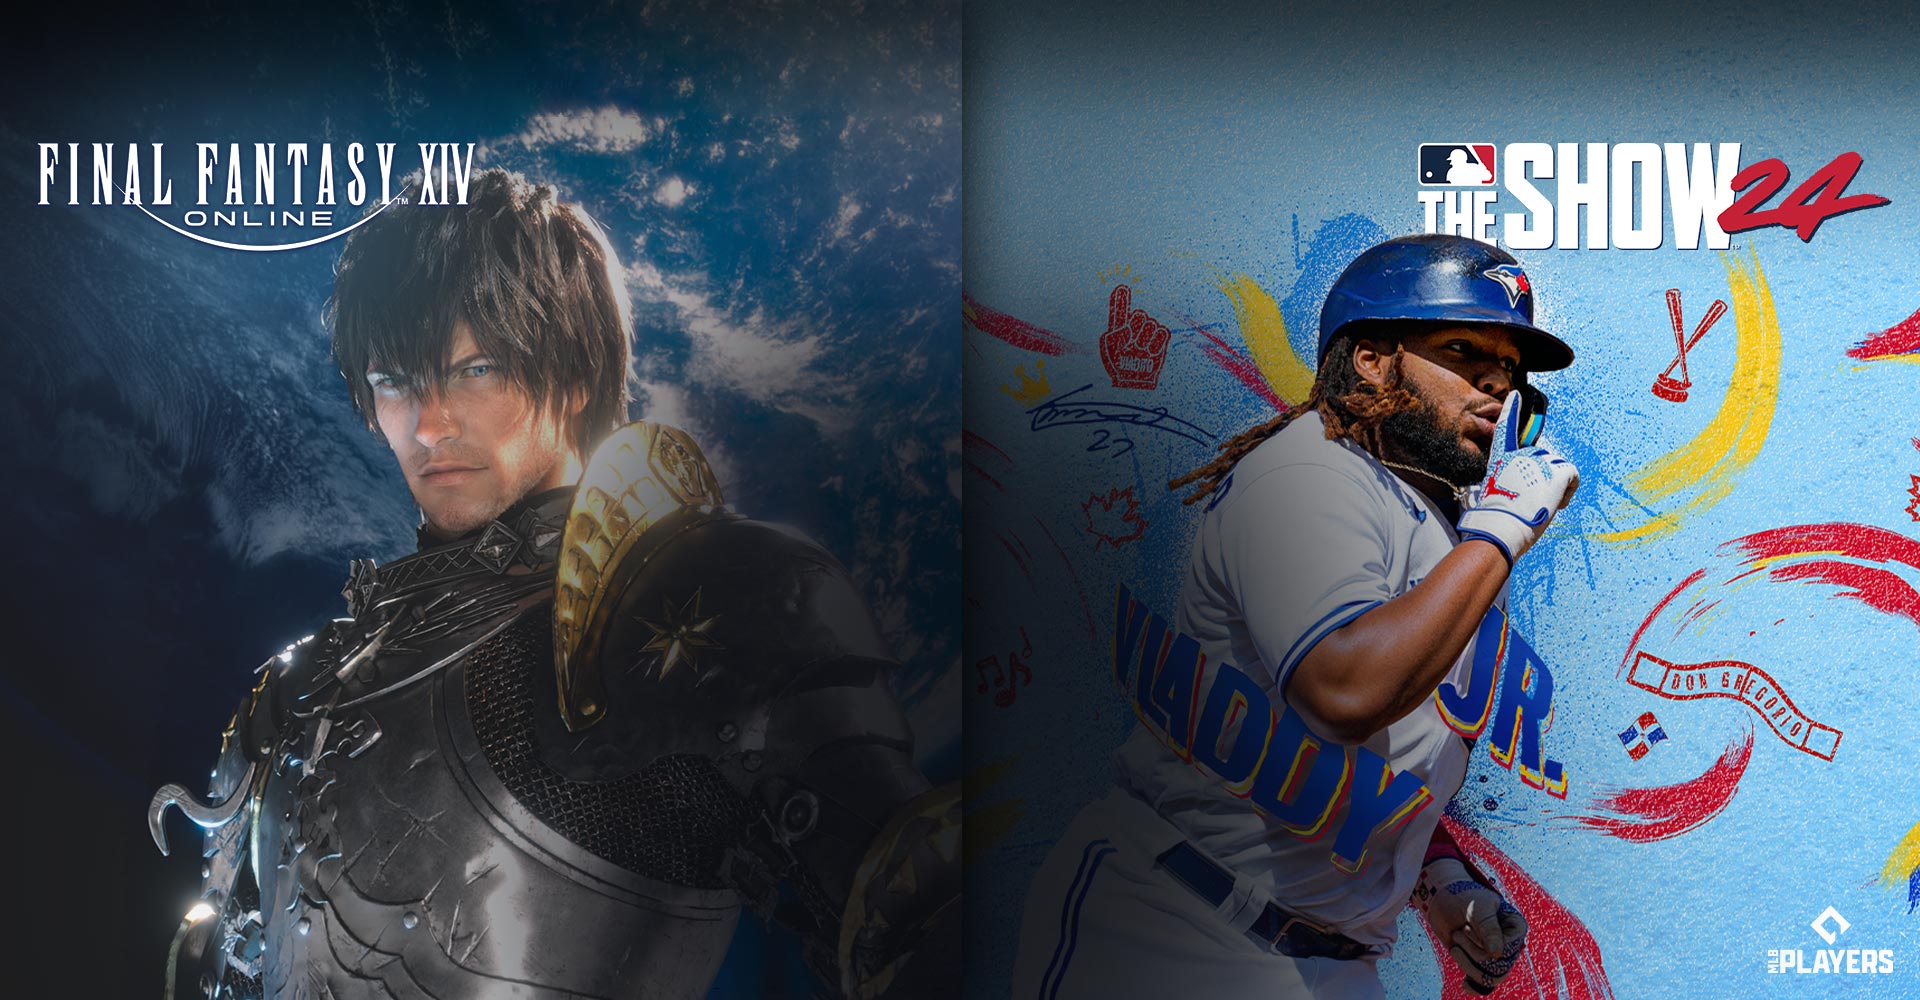 A character from Final Fantasy 14 Online standing in front of a blue planet and Baseball player Vladdy Jr. holding his pointer finger to his mouth in a shushing motion.